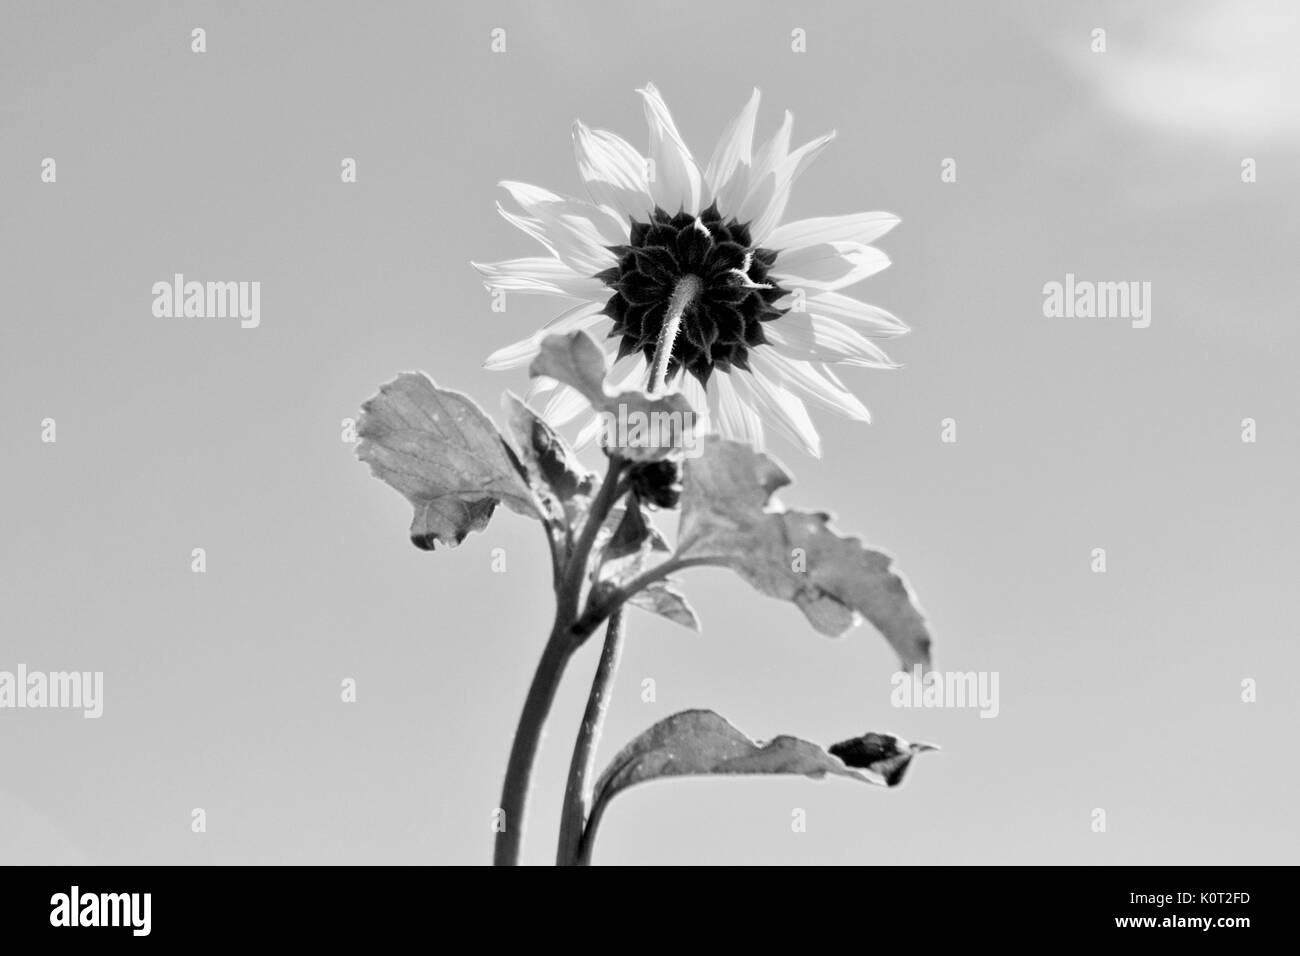 Sunflower with sky in background in black and white Stock Photo